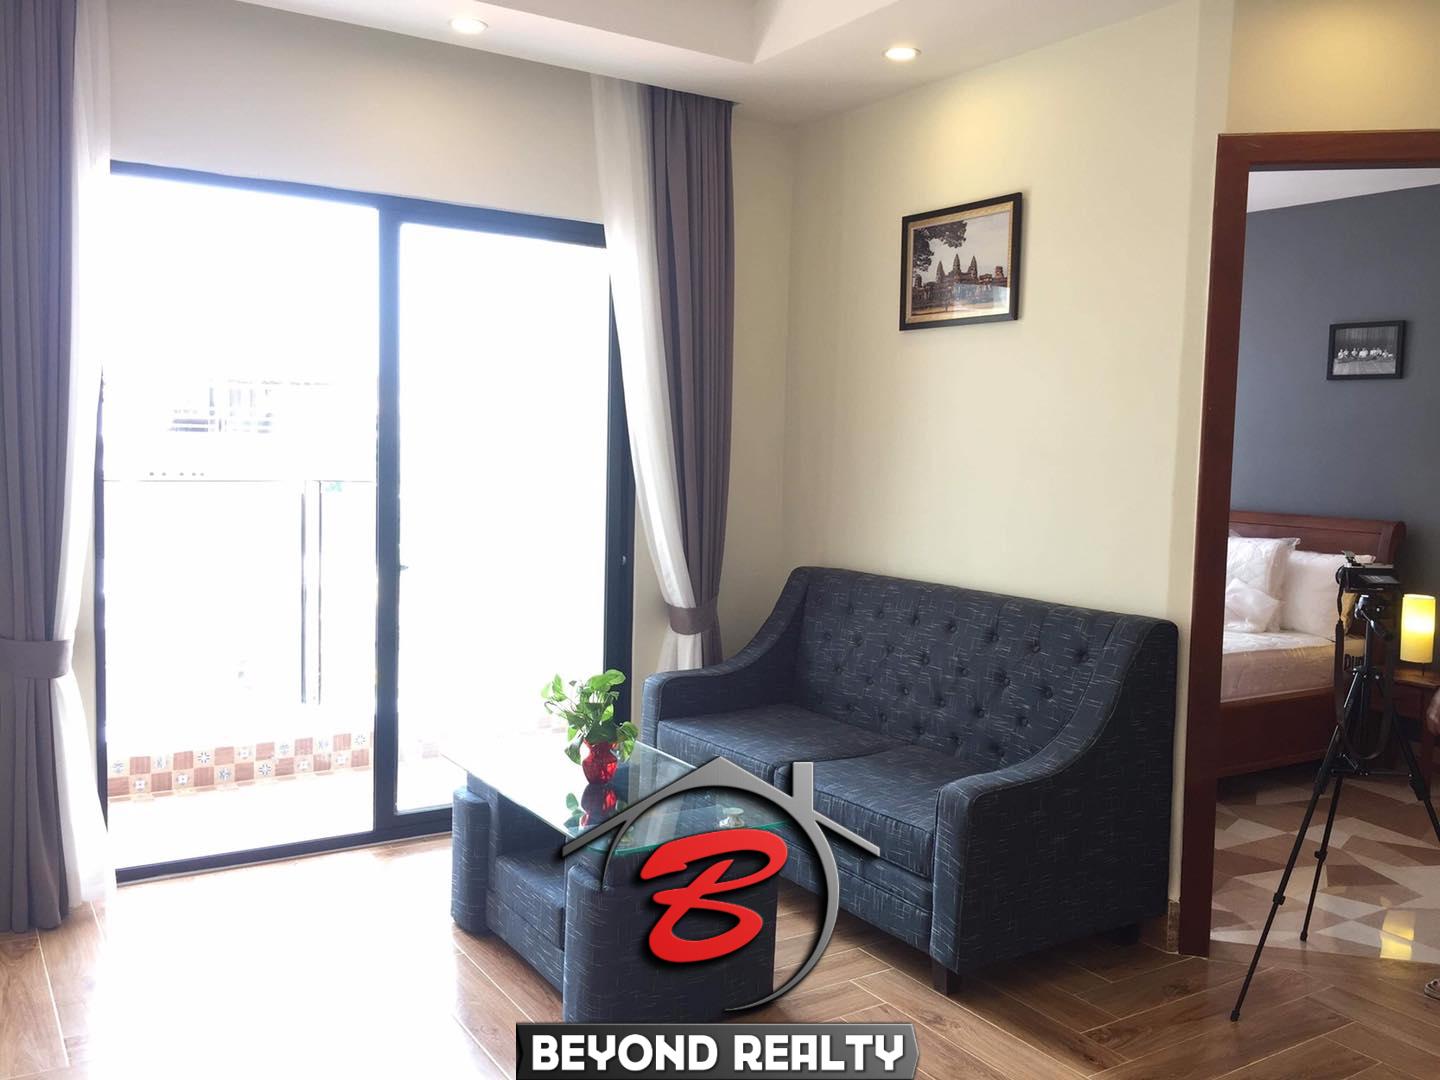 the living room of the 1-bedroom serviced apartment for rent in BKK3 in Phnom Penh Cambodia